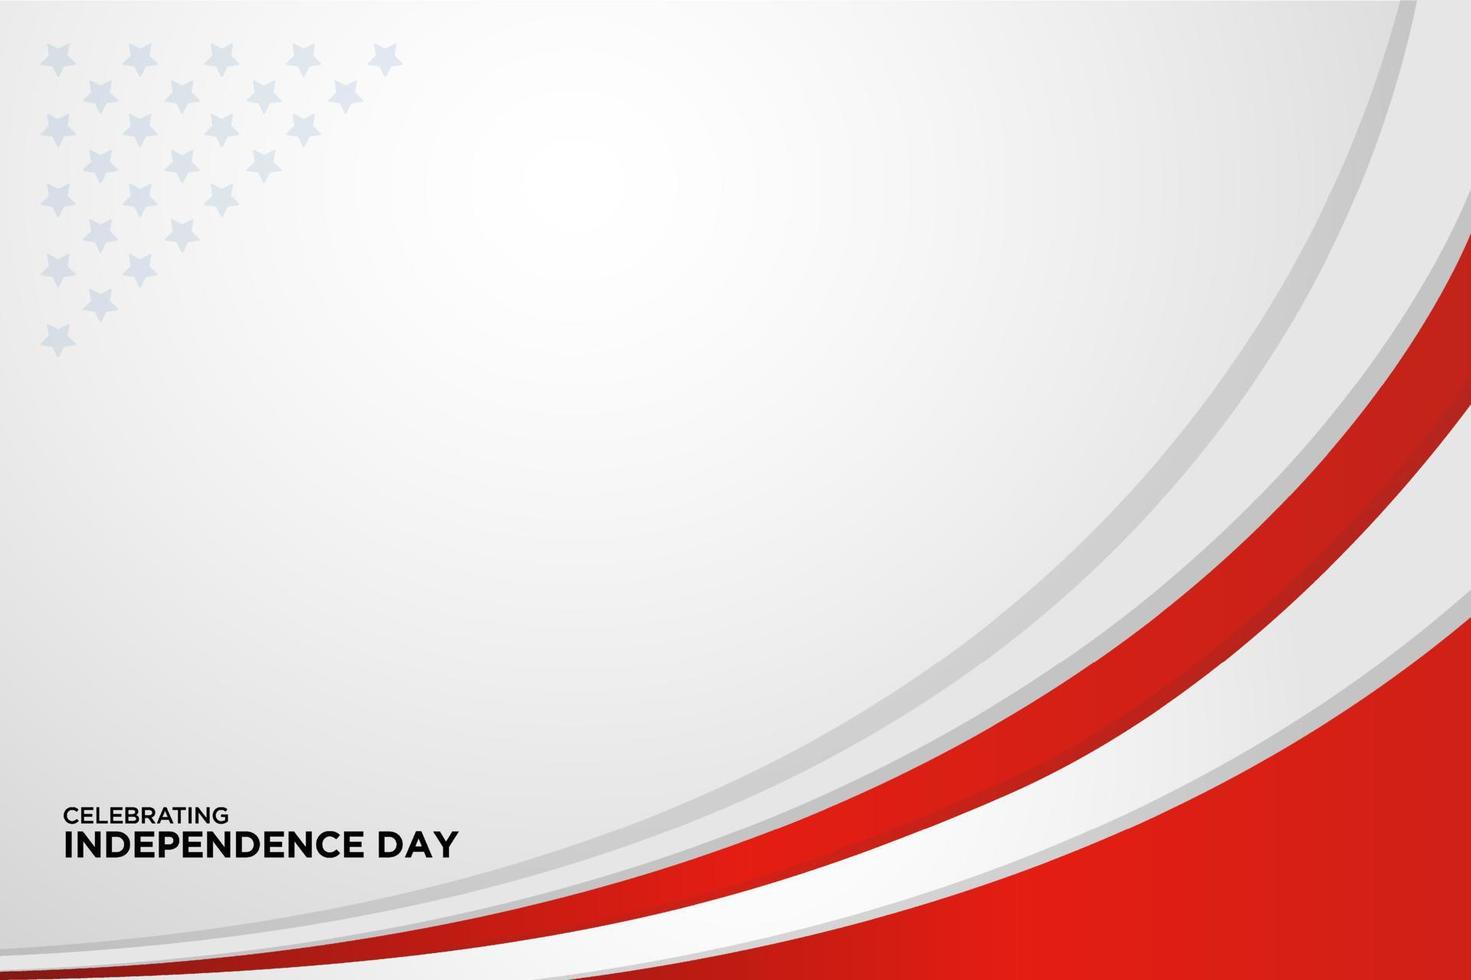 Simple and clean American independence day design background vector